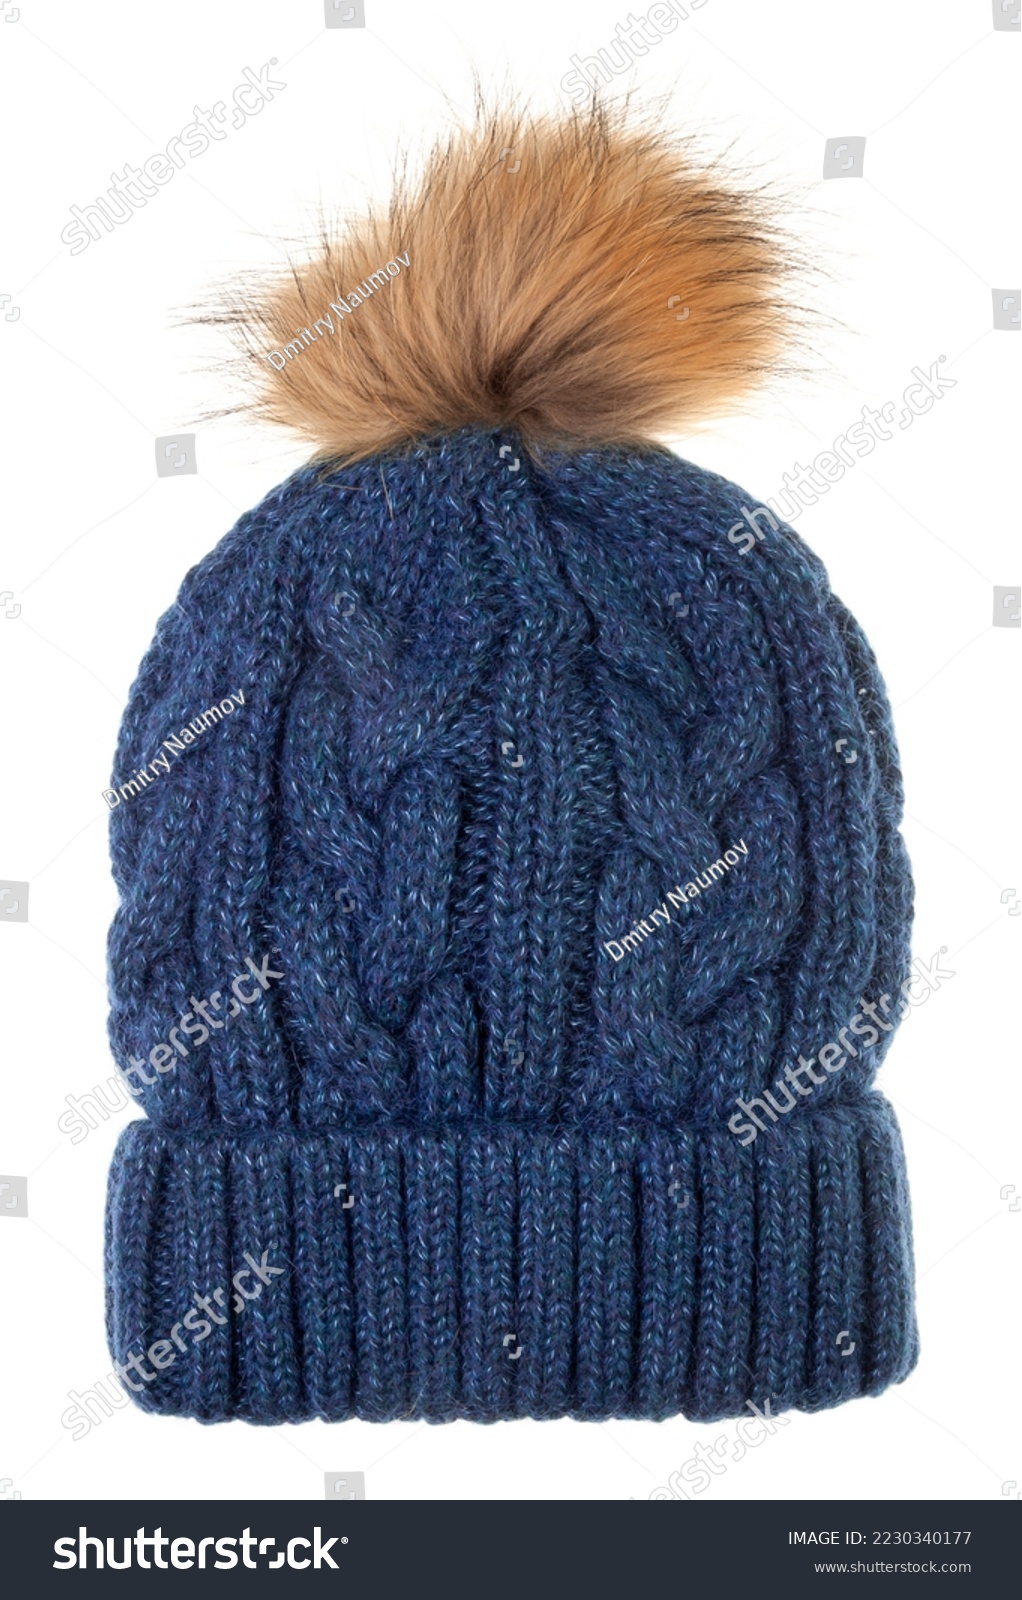 Blue woolly winter bobble hat decorated with cable knitting ornament isolated on white background. Handmade woolly cap with fake fur pompom on top #2230340177